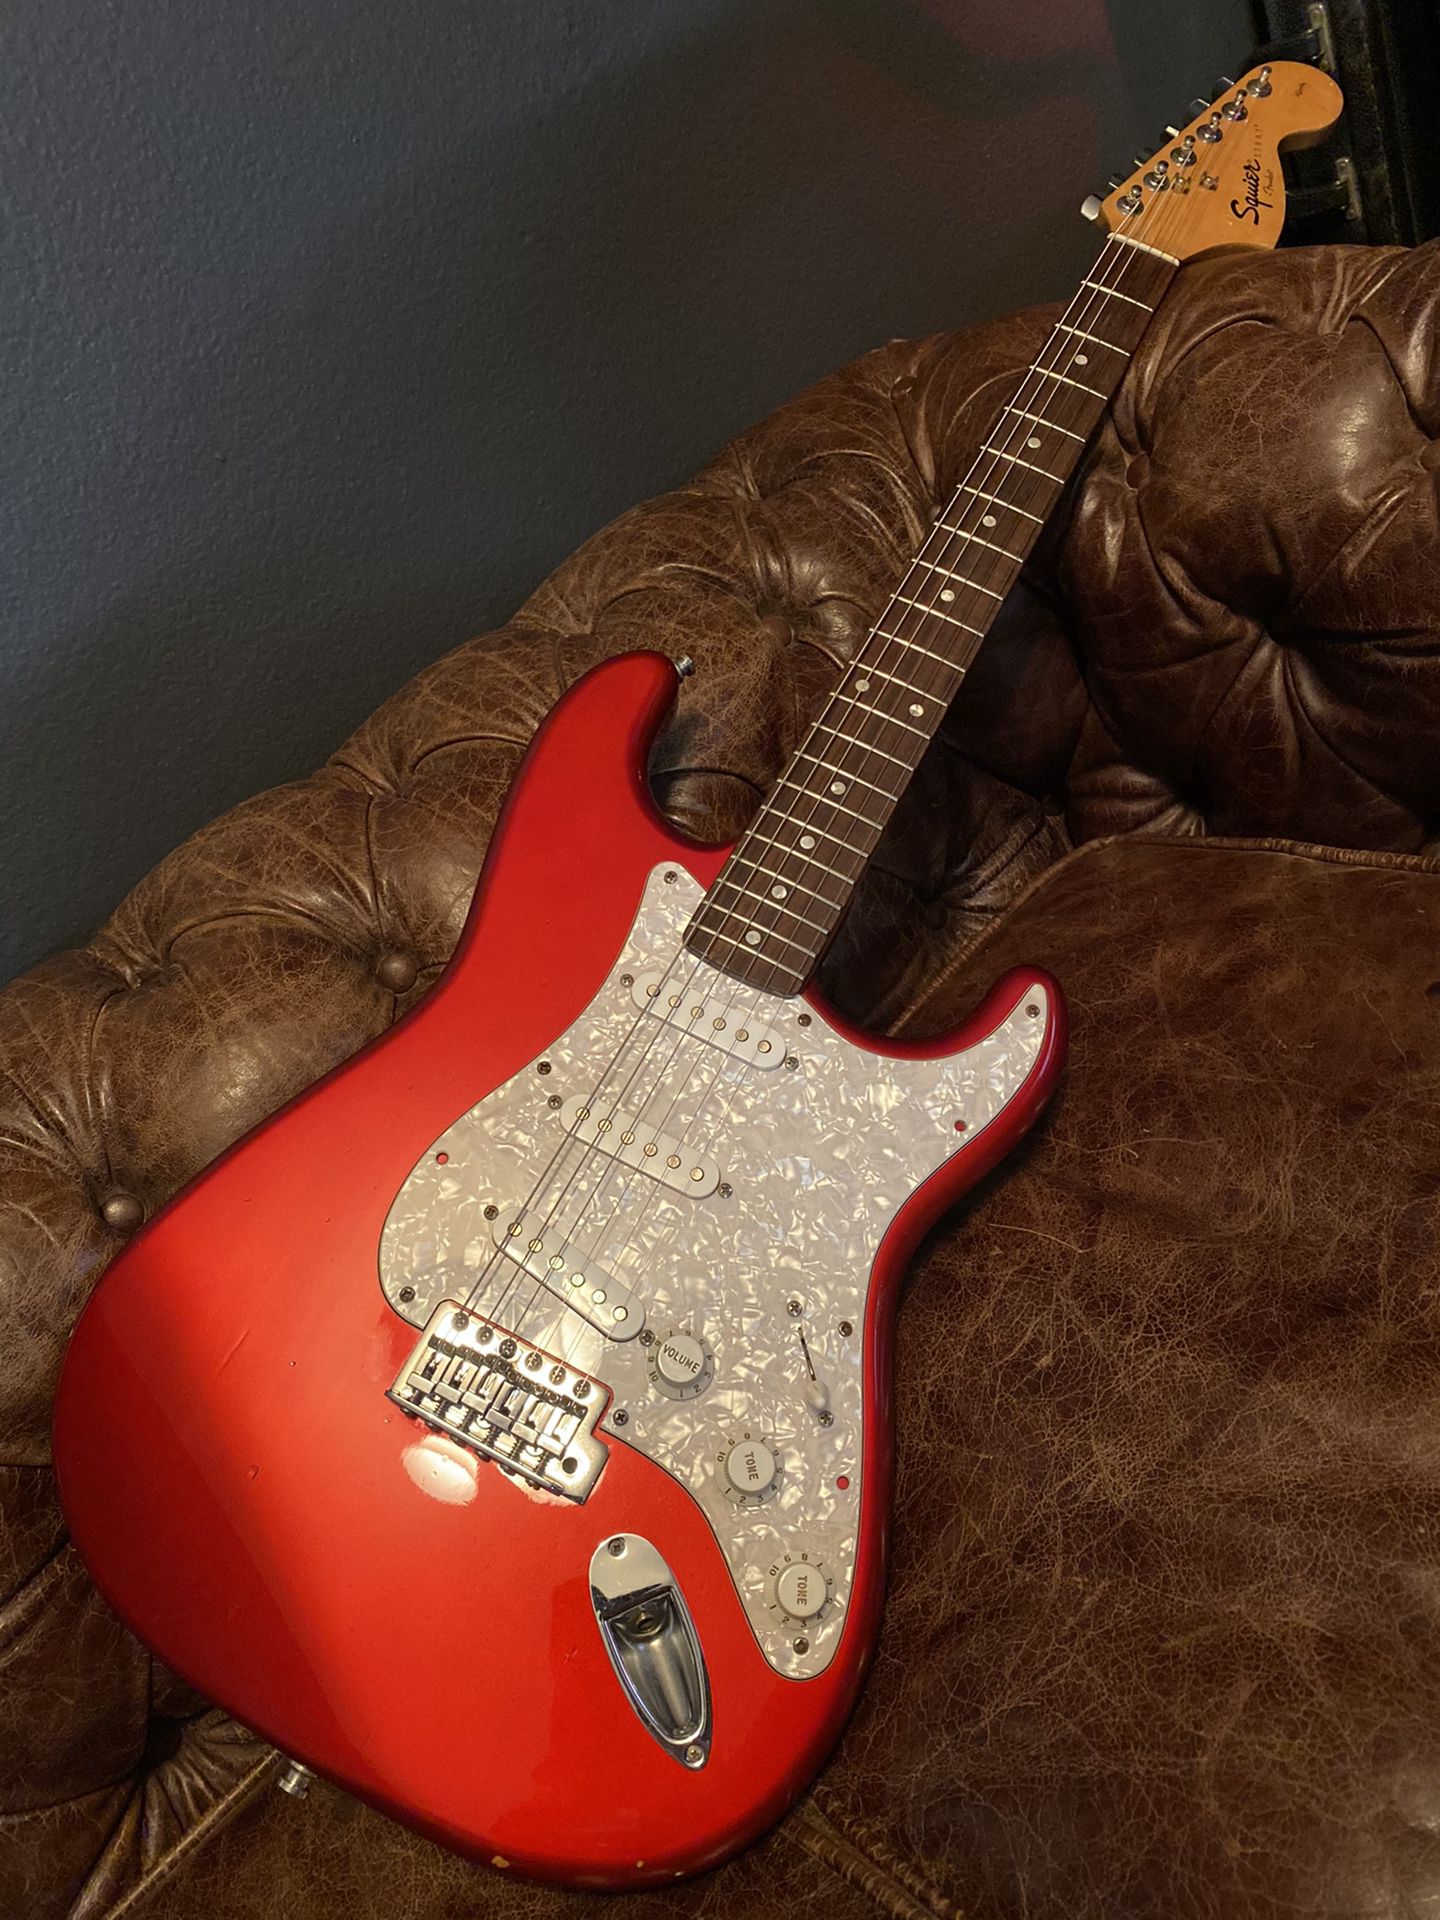 Squier Strat by Fender, Affinity Series Electric Guitar